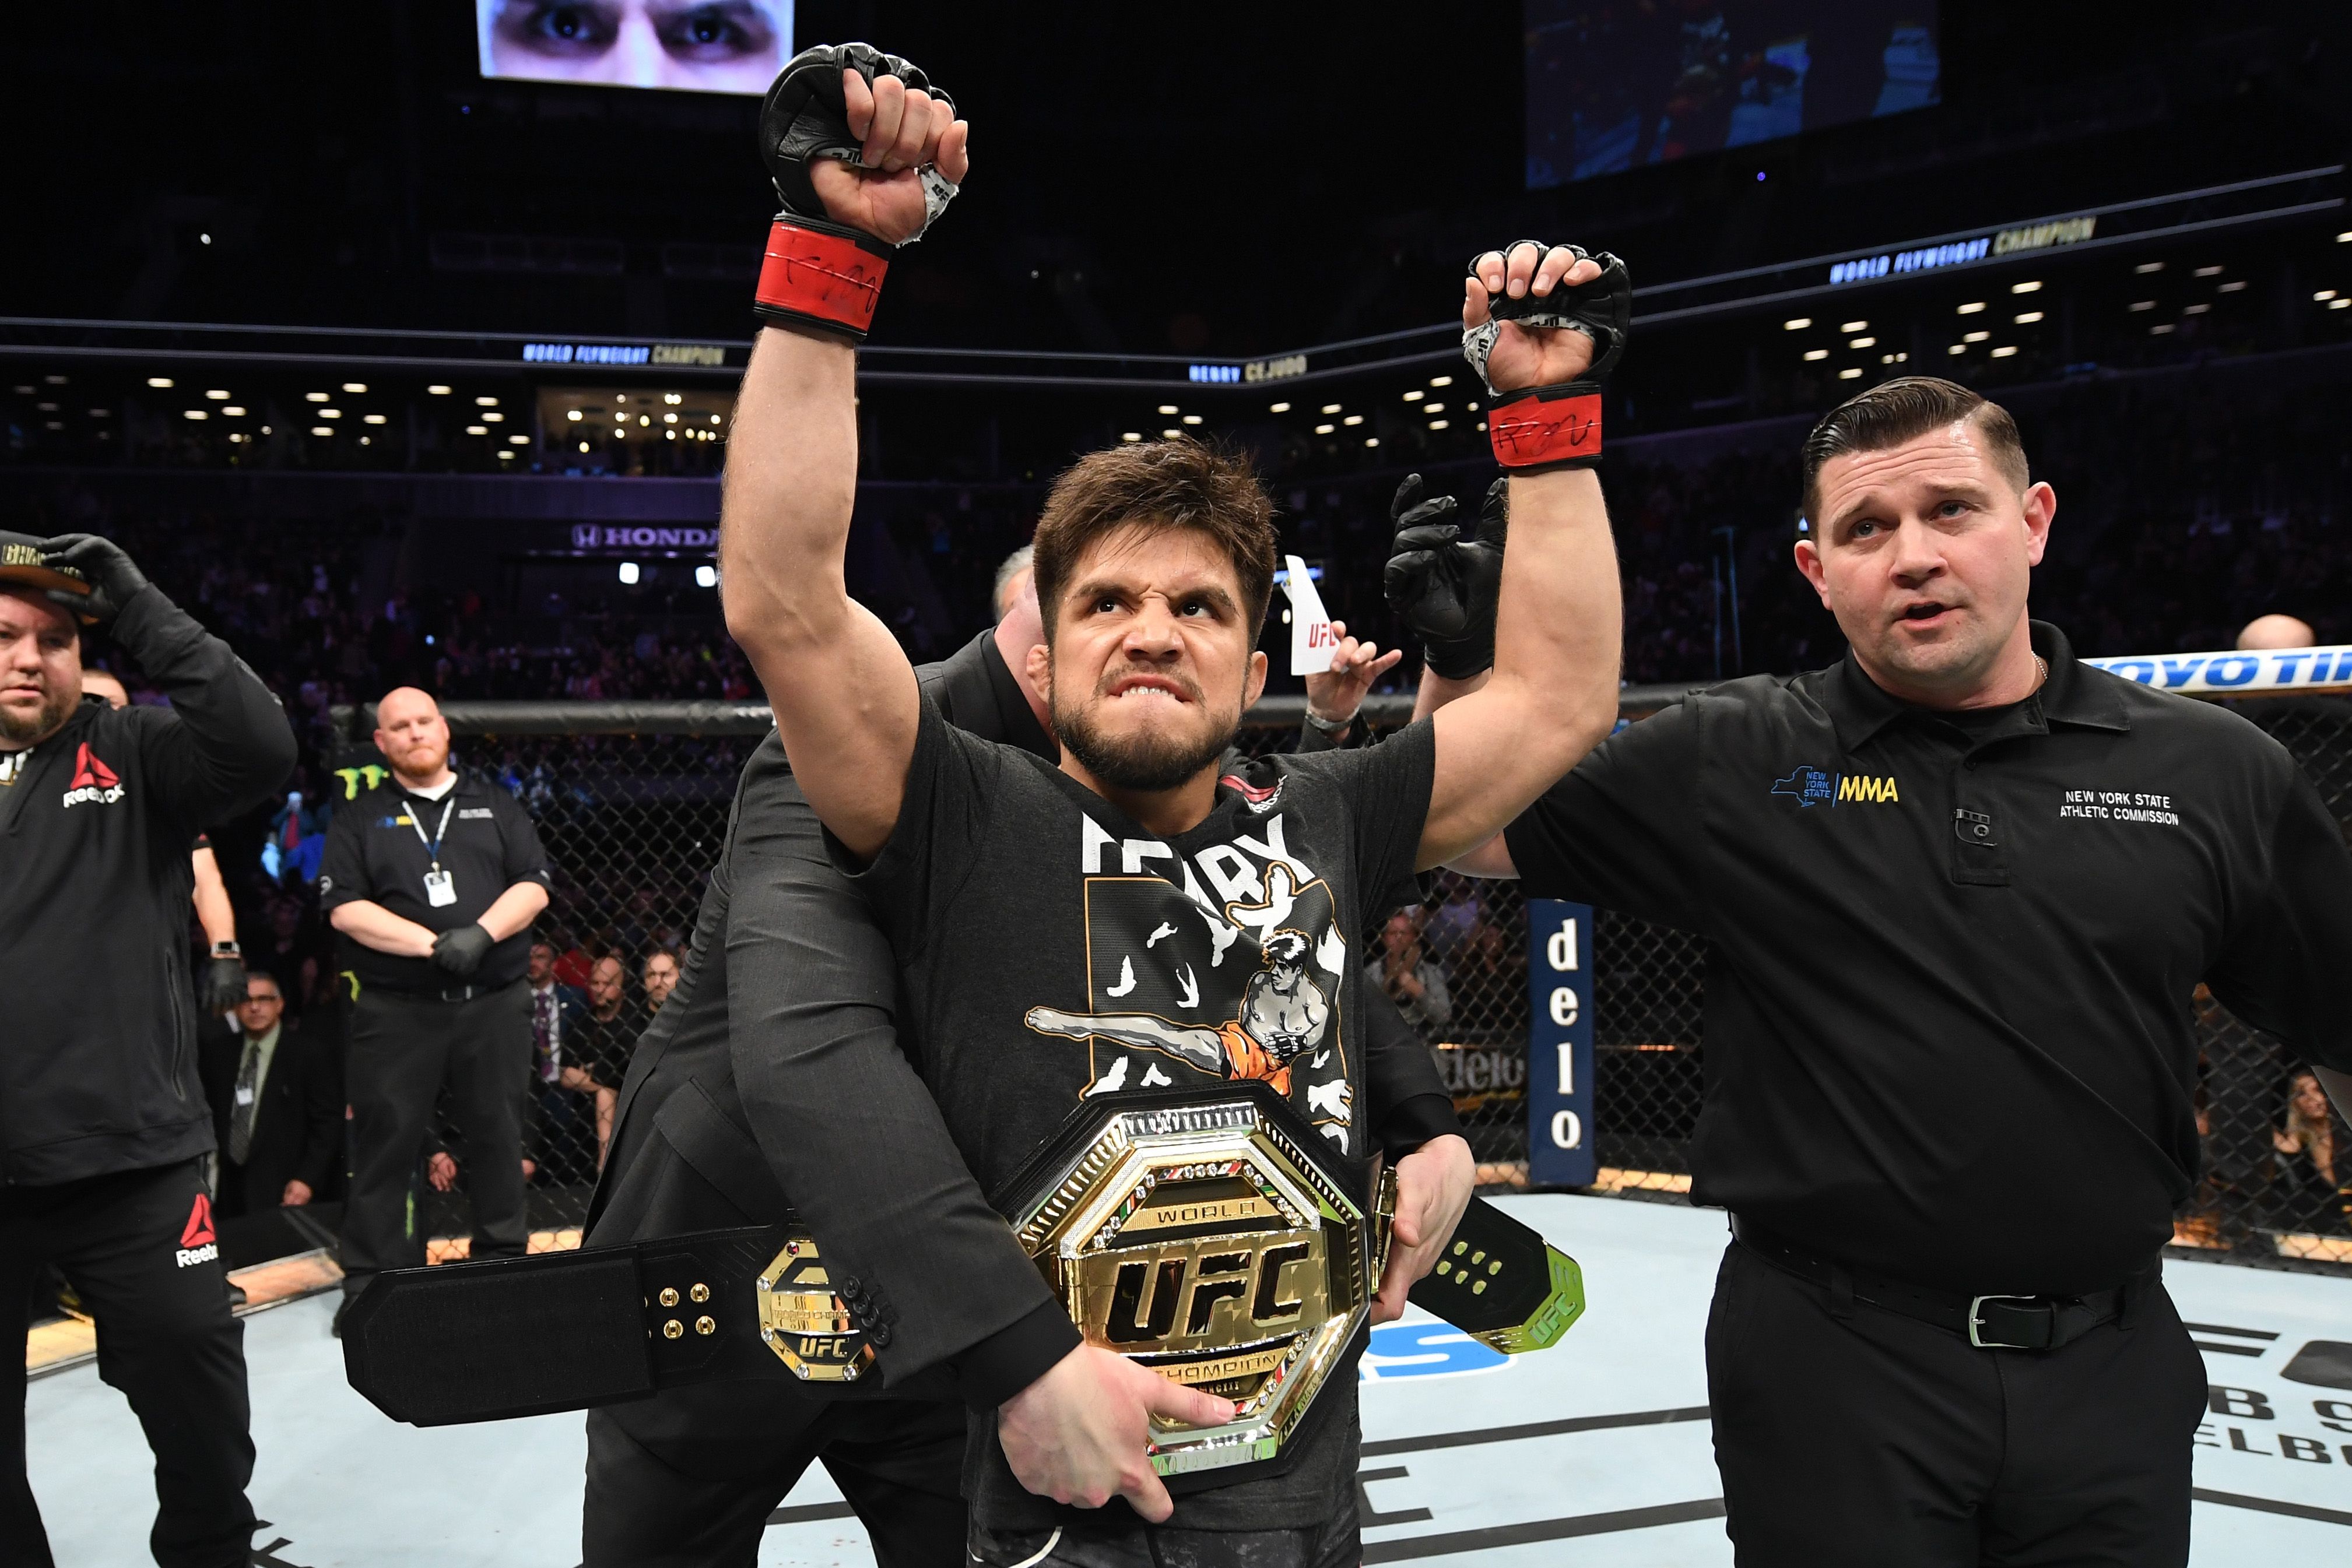 Henry Cejudo blasts T.J. Dillashaw in 32 seconds to retain